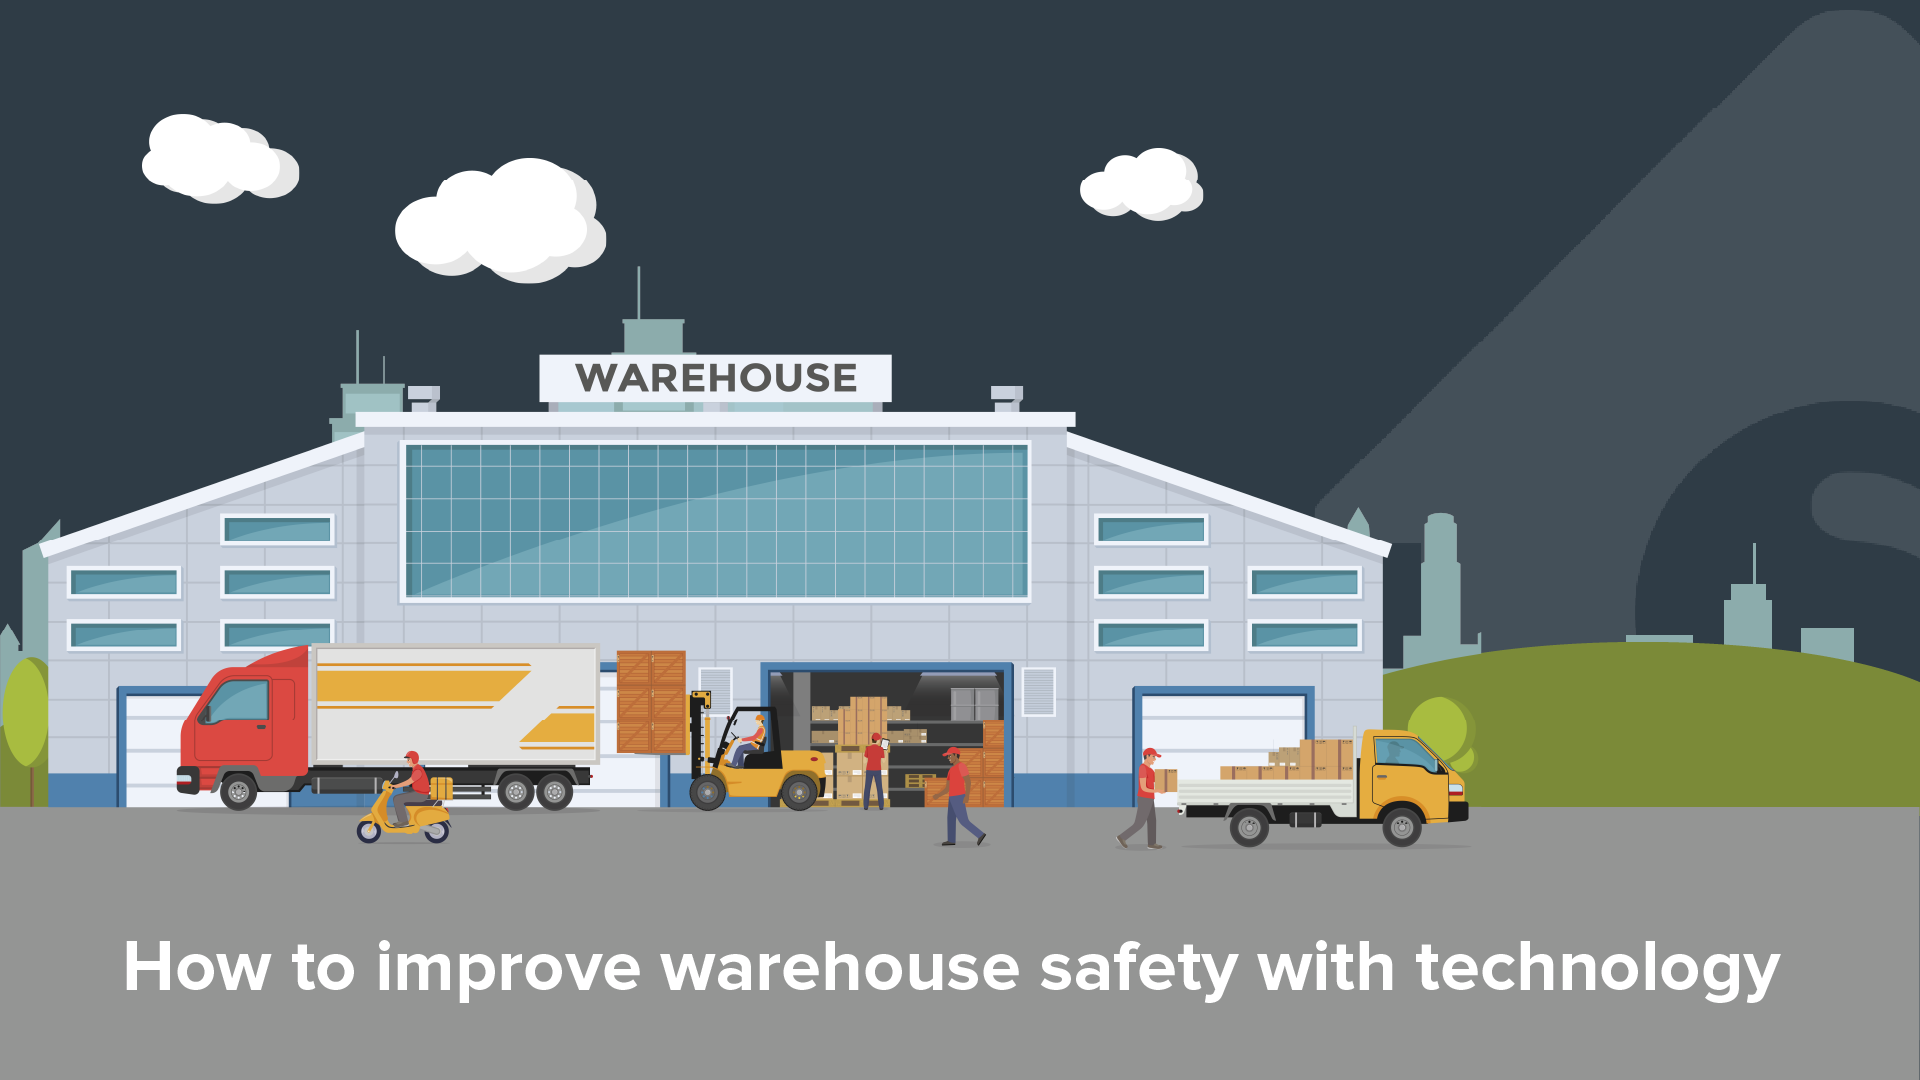 How to improve warehouse safety with technology